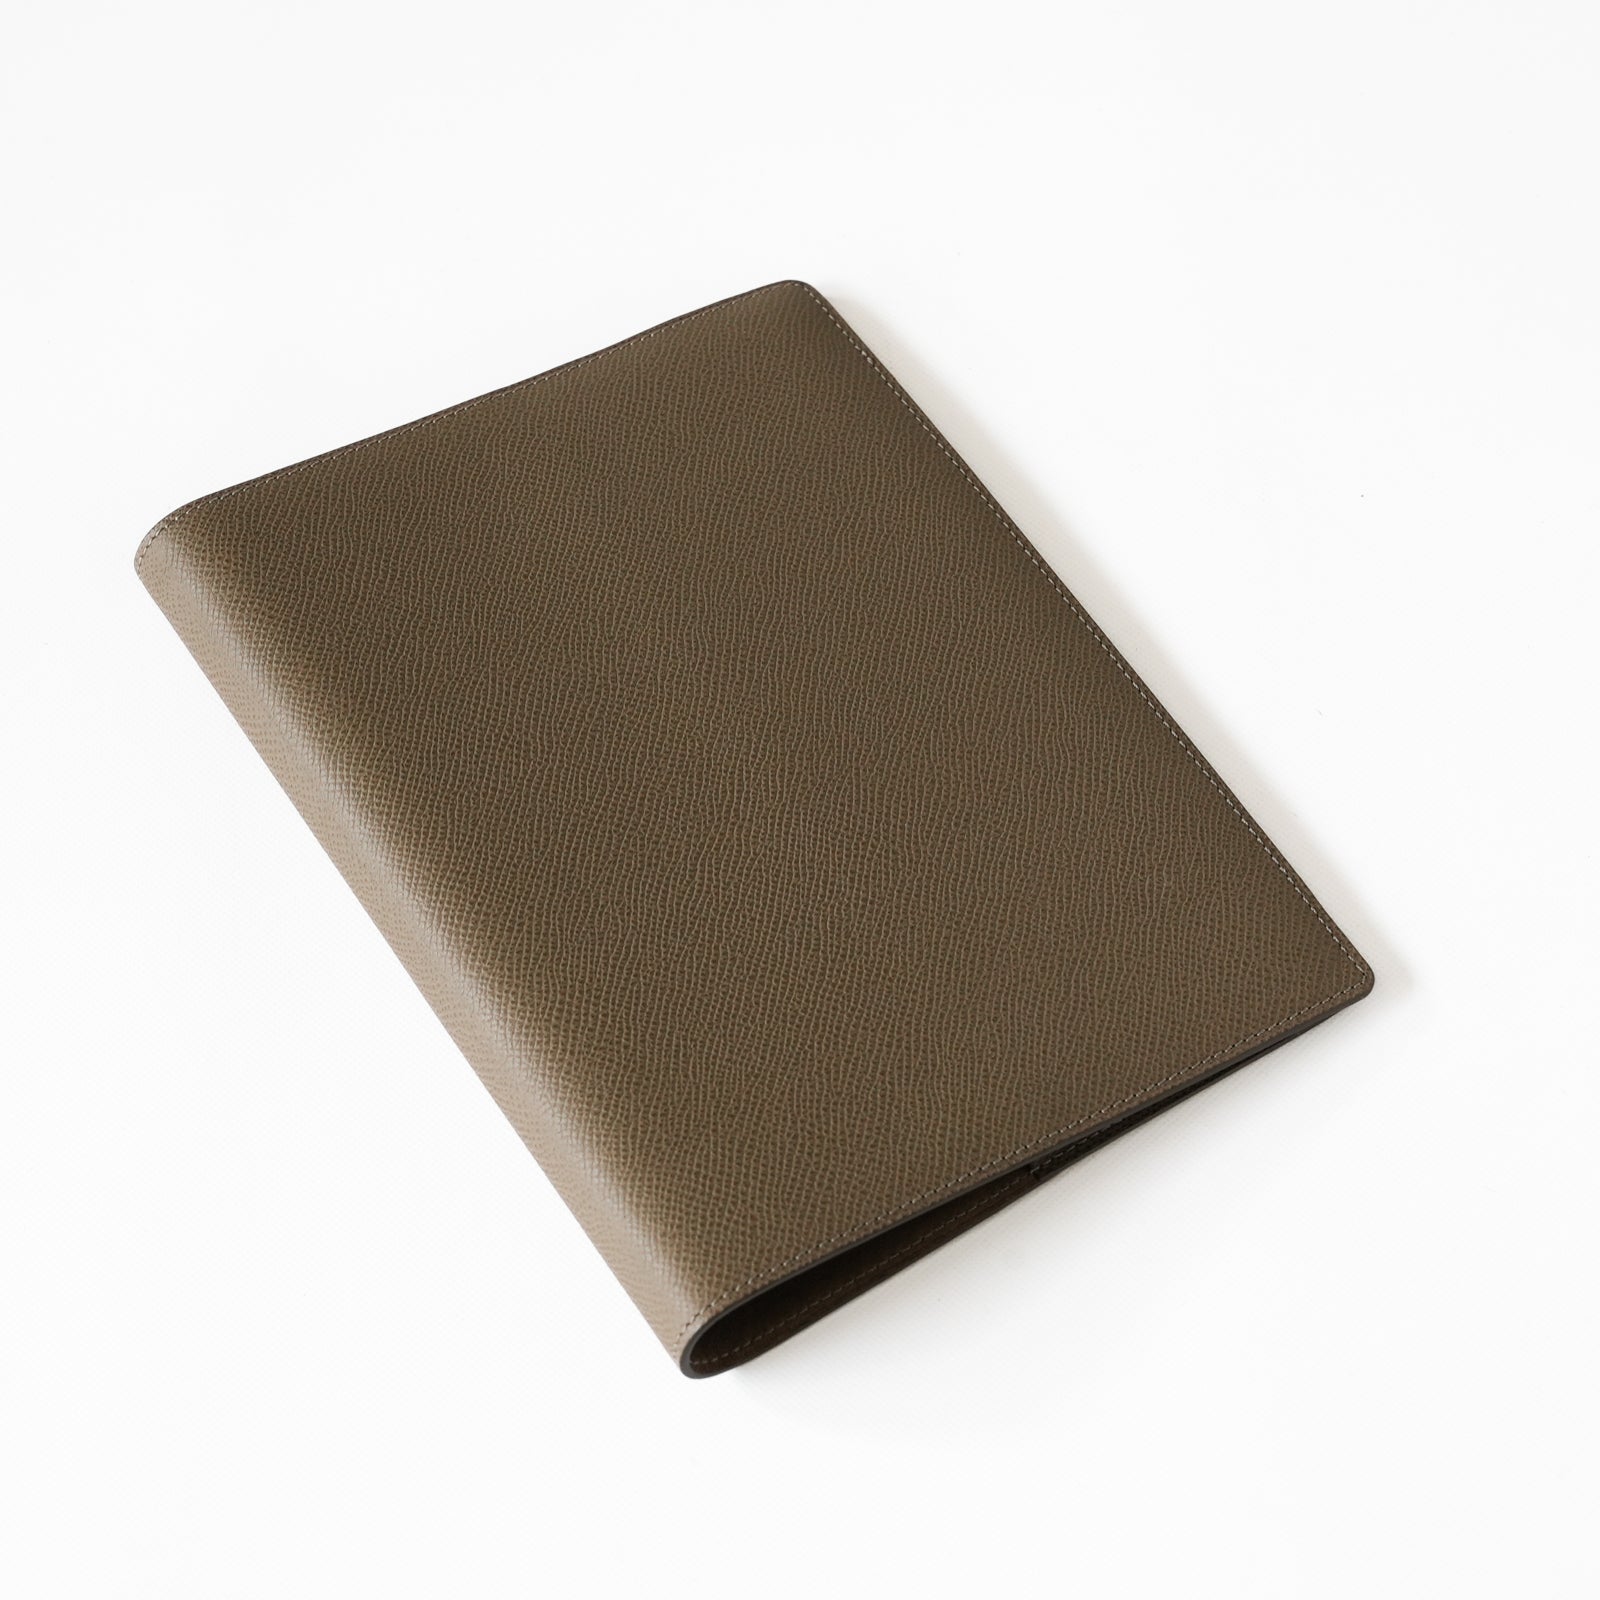 [Service item] Hobonichi Cousin 5-year notebook cover Vo Epson